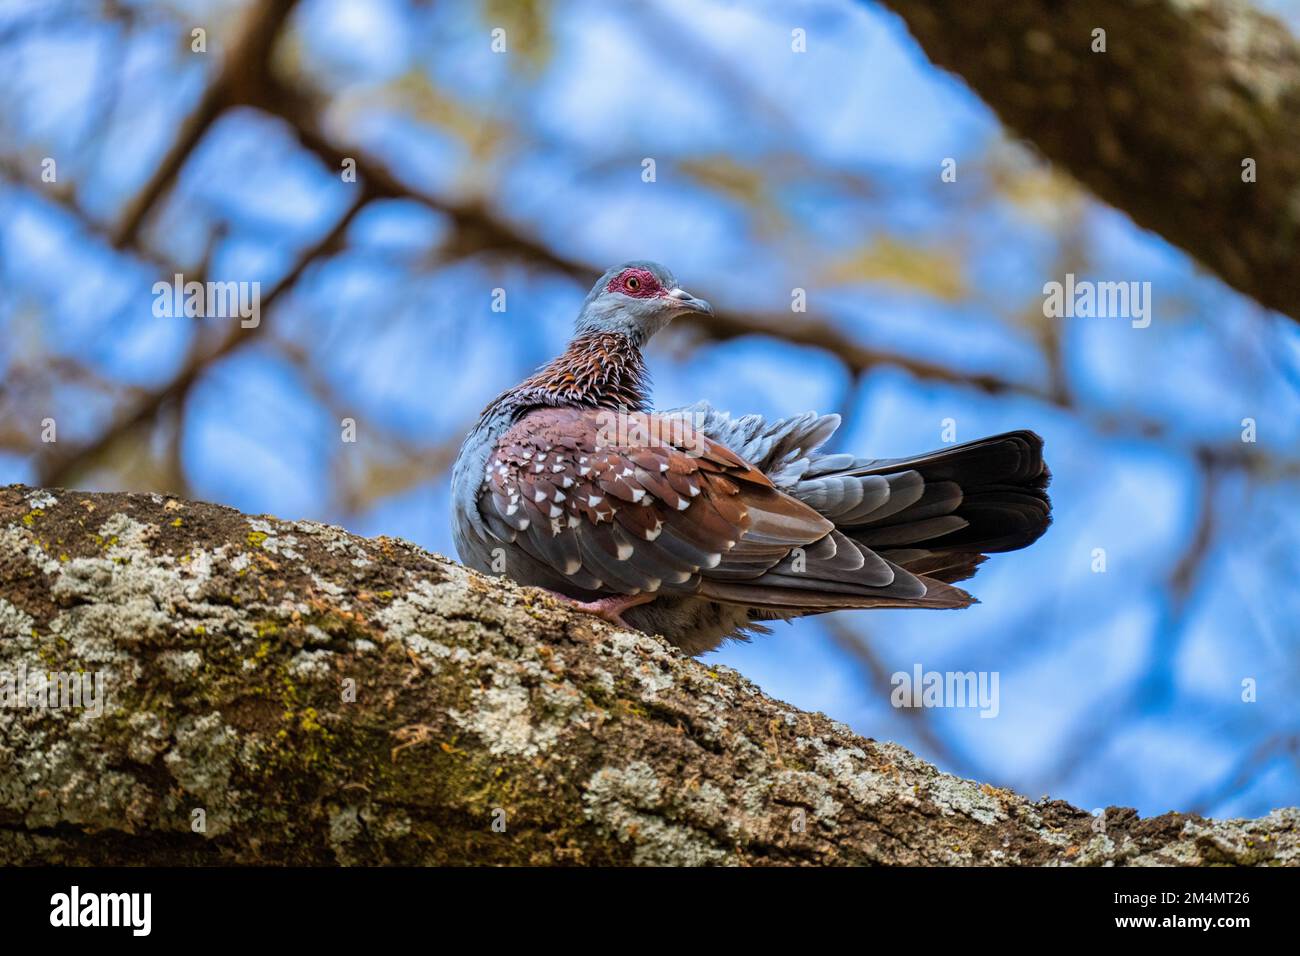 Speckled pigeon (Columba guinea) resting on a tree branch Photographed in Tanzania Stock Photo